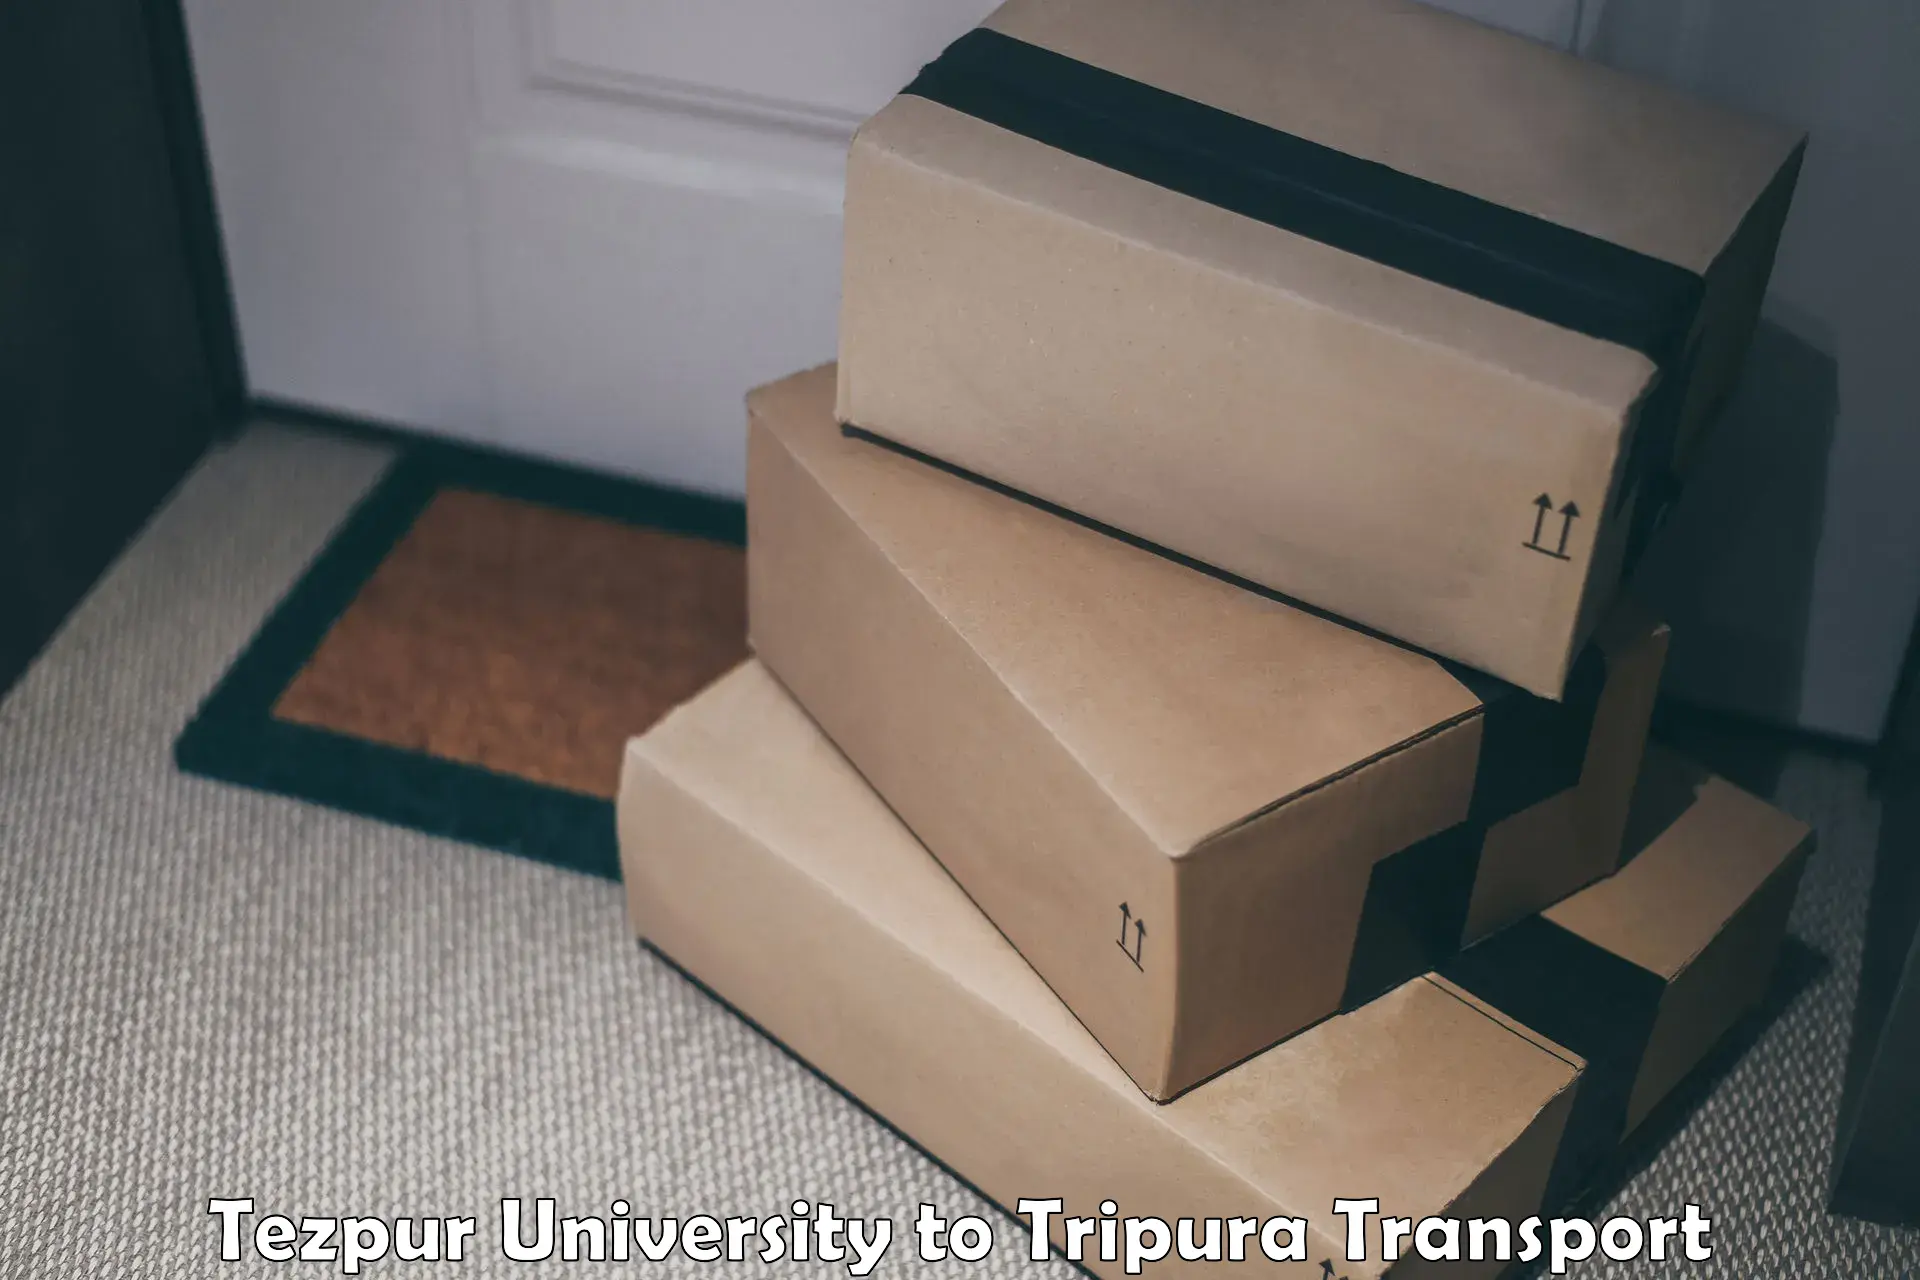 Vehicle courier services in Tezpur University to Santirbazar